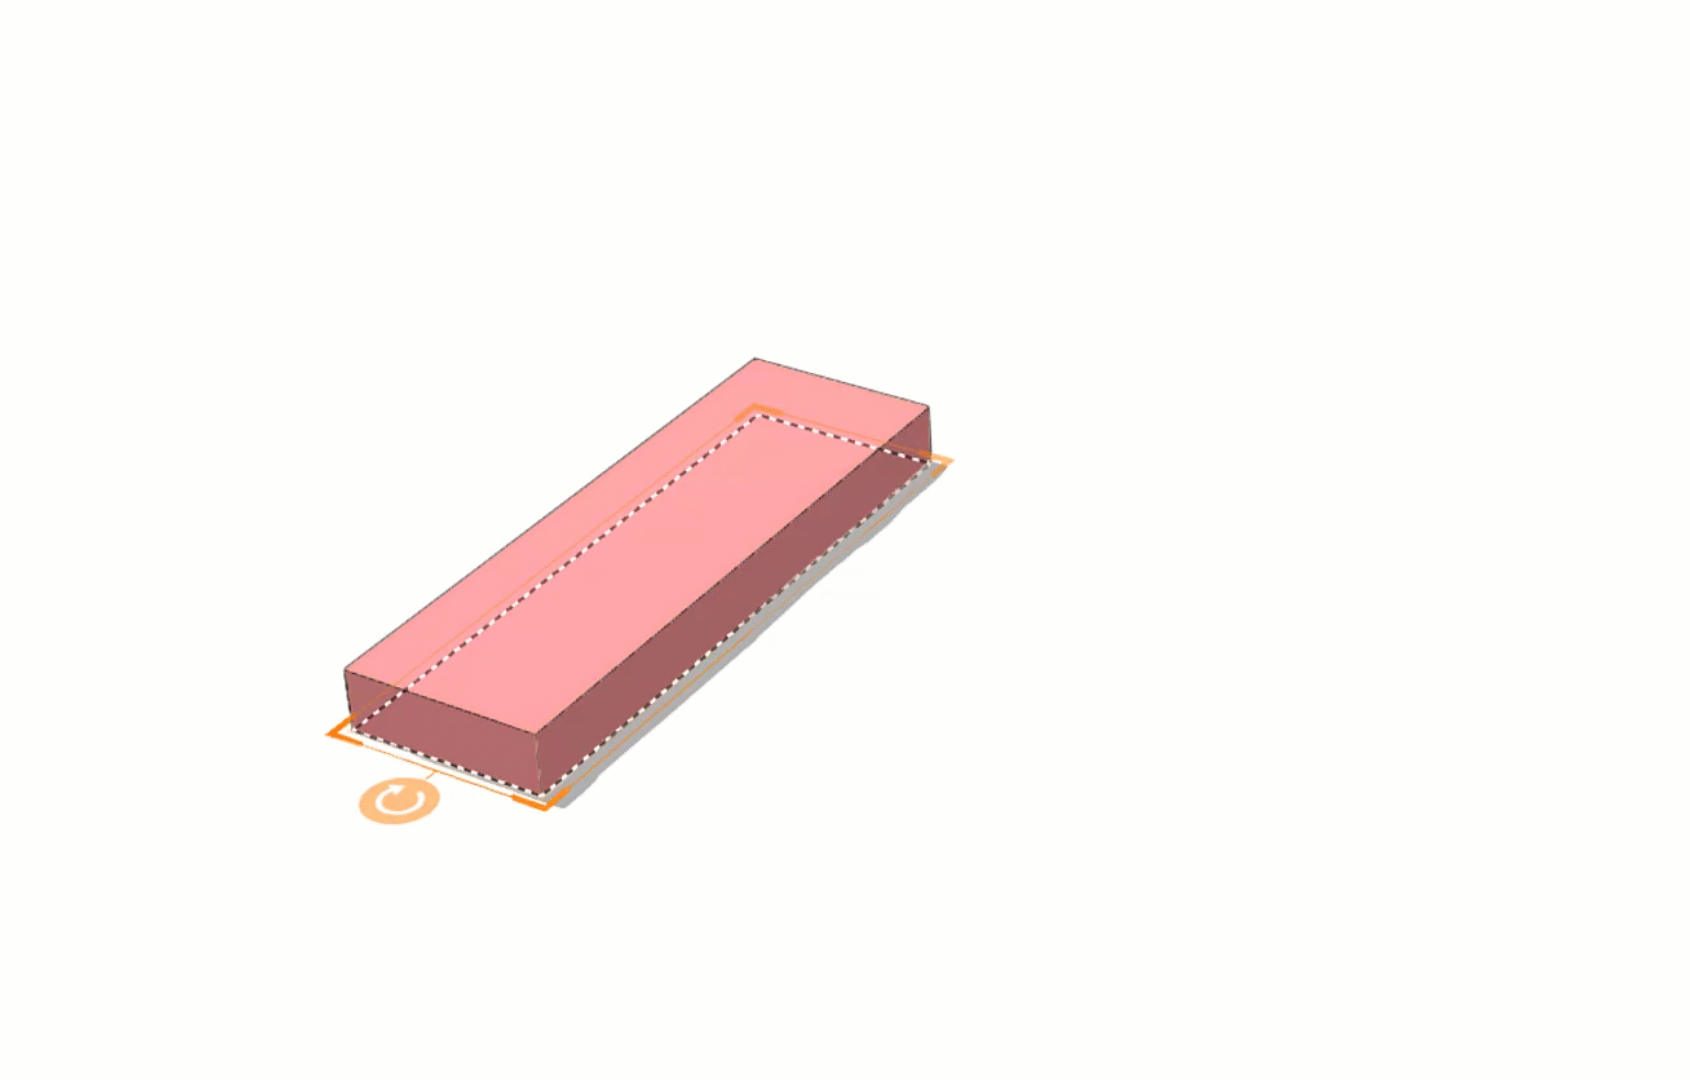 A GIF showing a pink L-shaped shape representing the measurement  tools for measuring 3D buildings and designs